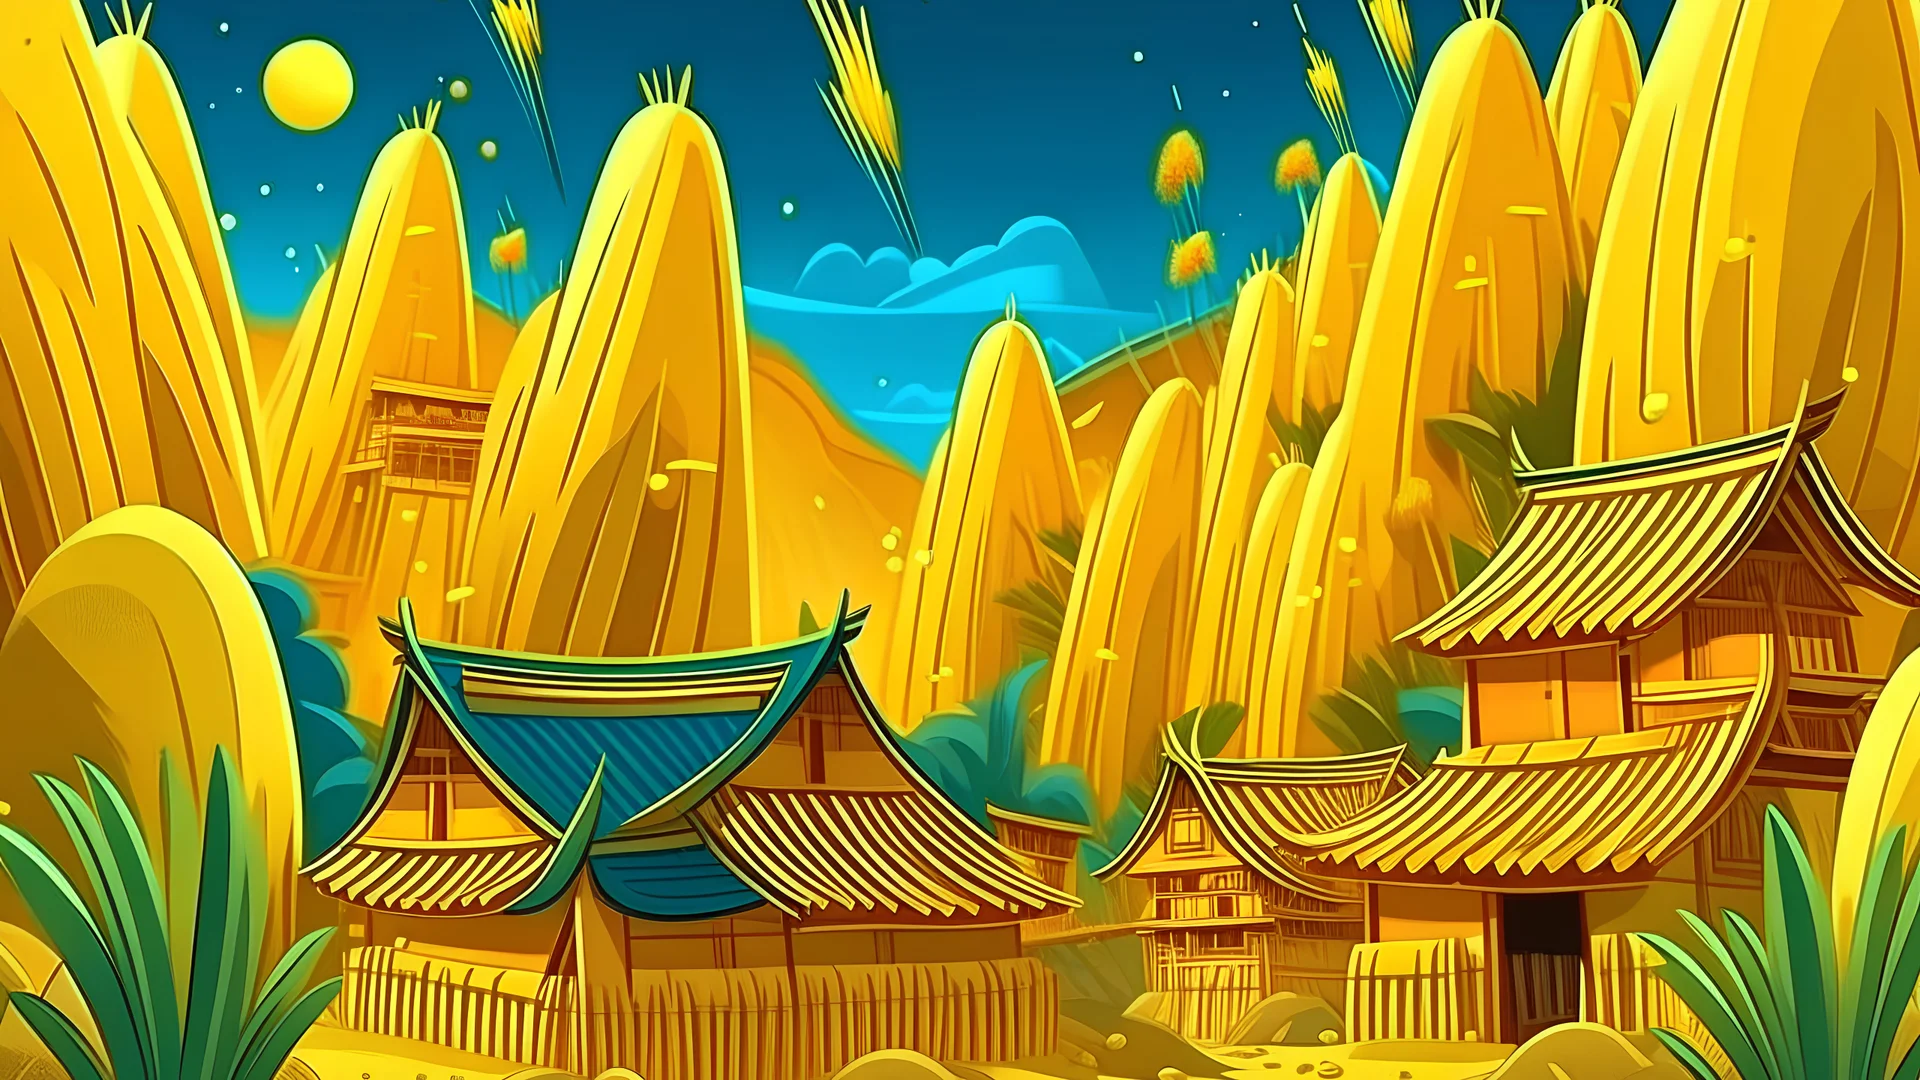 fantasy cartoon style illustration: golden bamboo firecrackers make loud noises in a very small Chinese mountain village